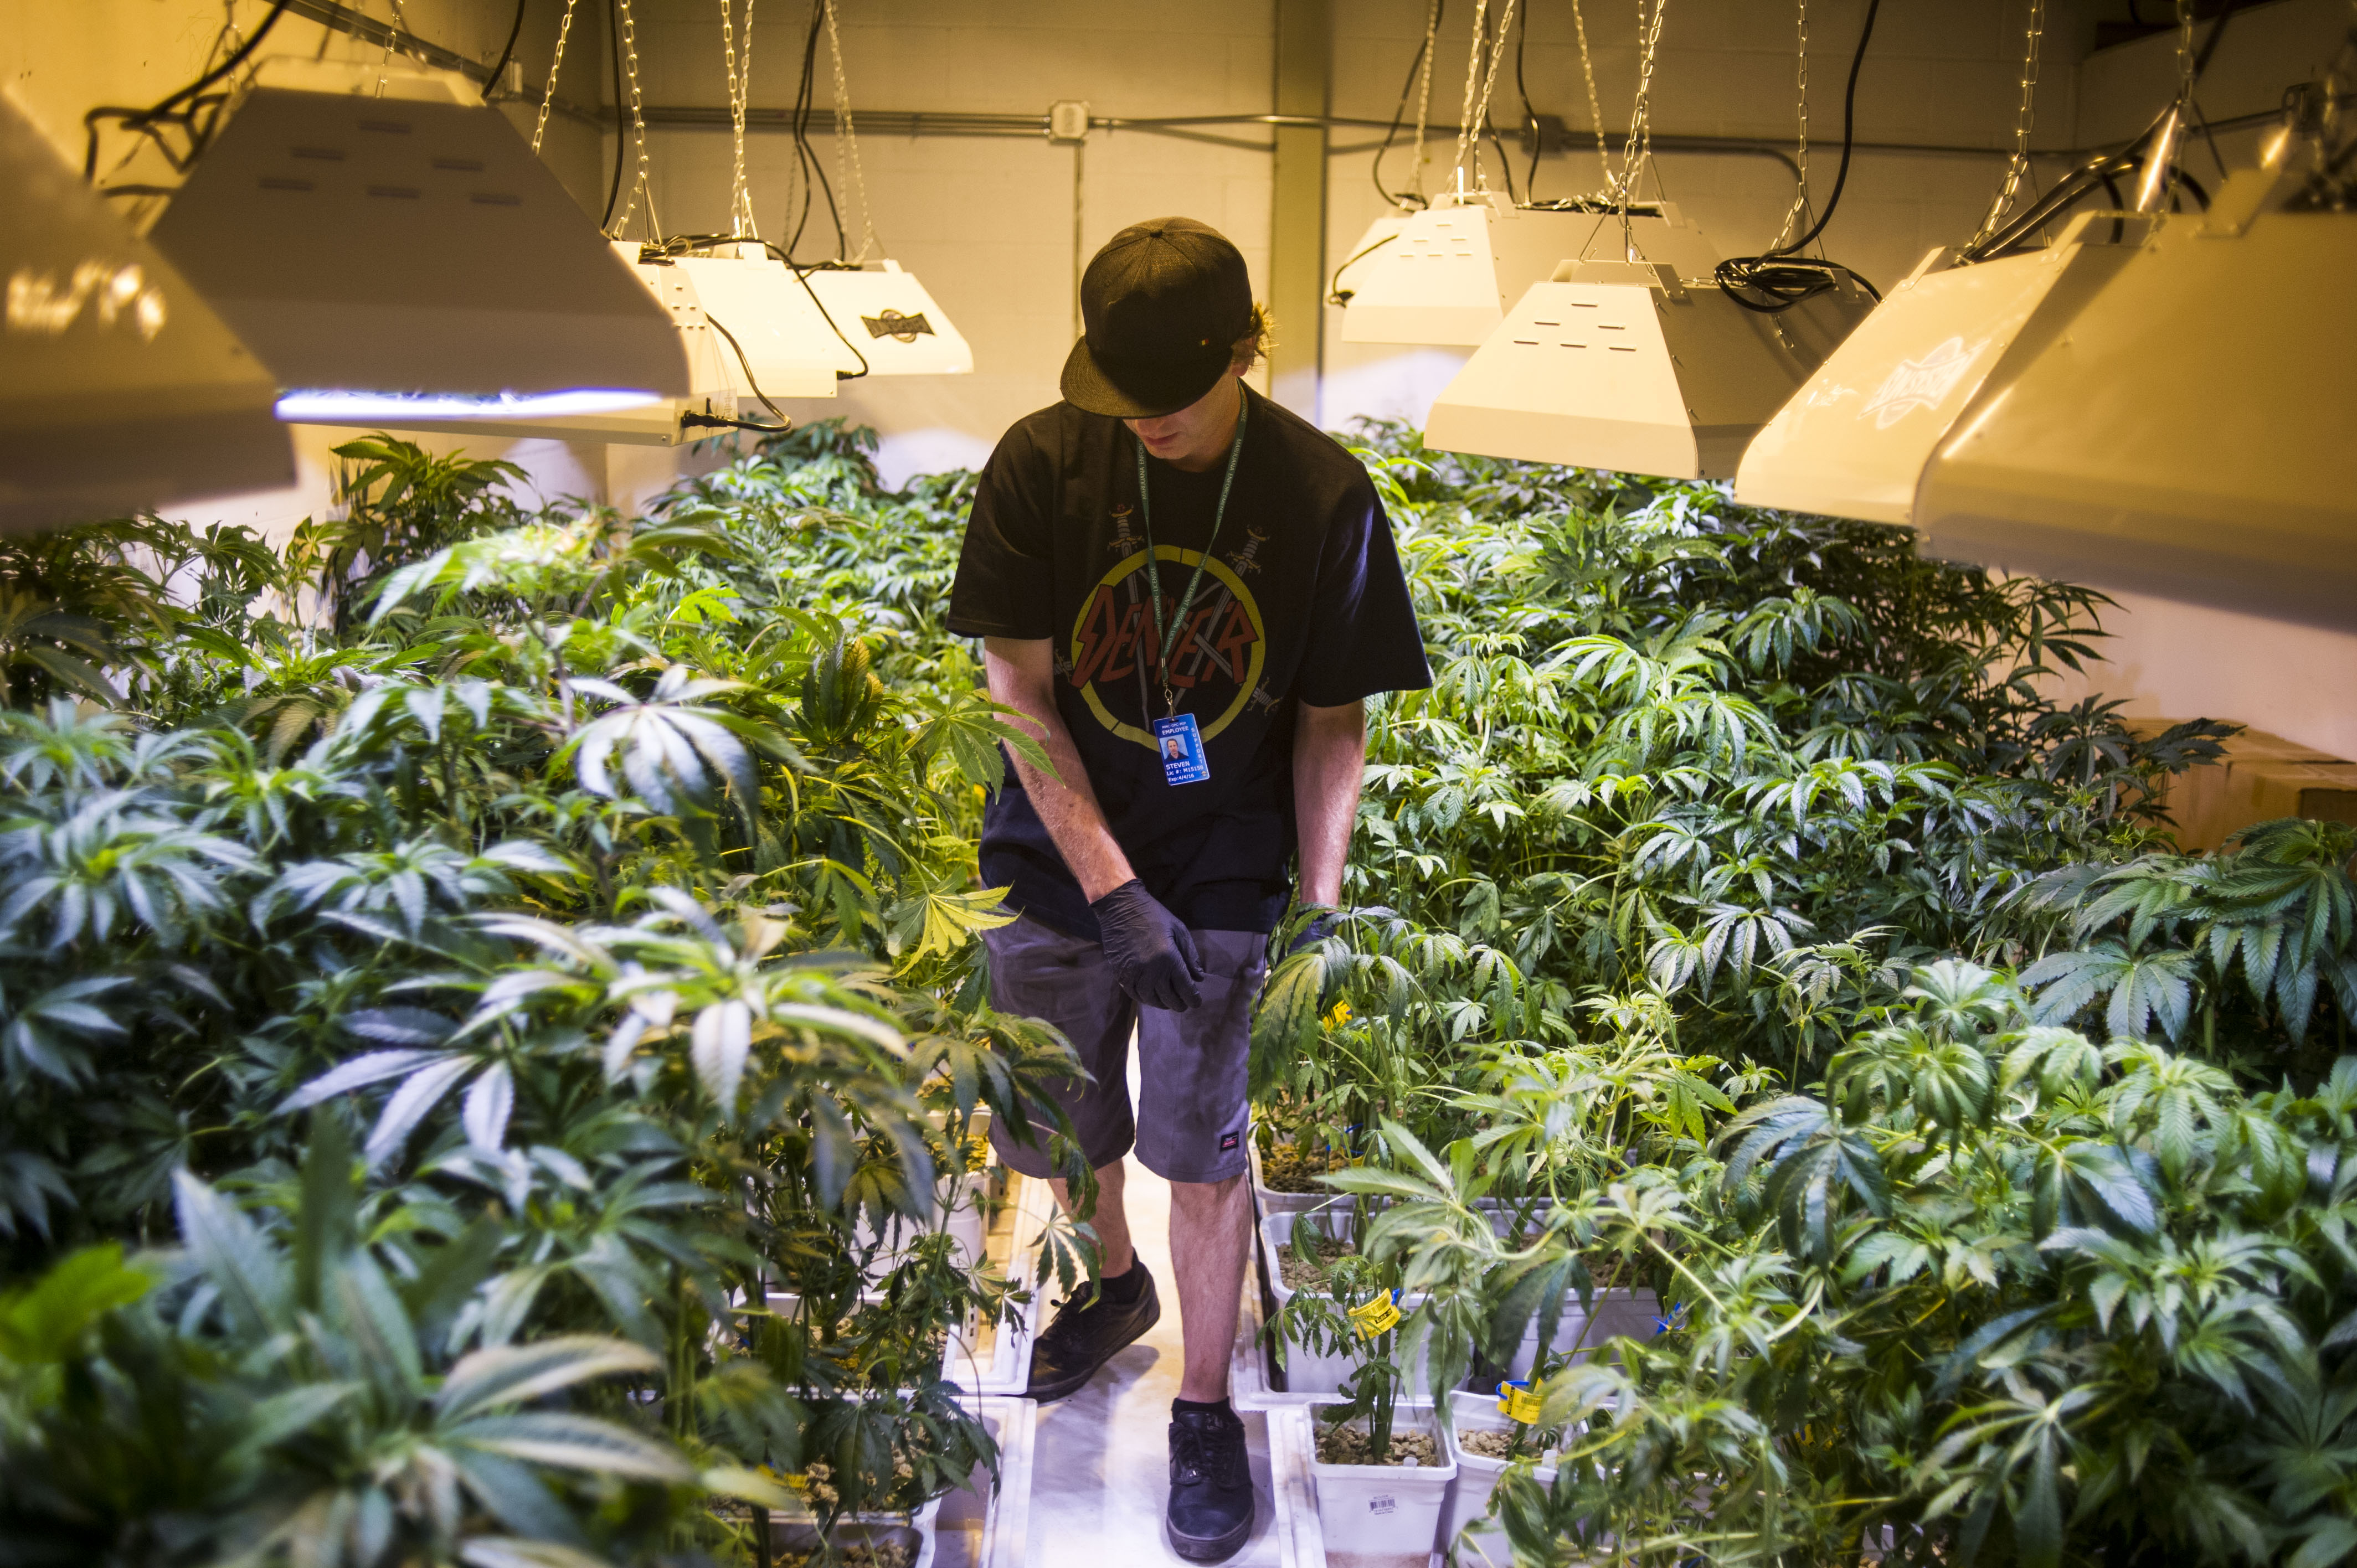 Steve Herin, Master Grower at Incredibles, works on repotting marijuana plants in the grow facility on Wednesday, August 13, 2014 in Denver, Colorado. (Kent Nishimura—Denver Post via Getty Images)